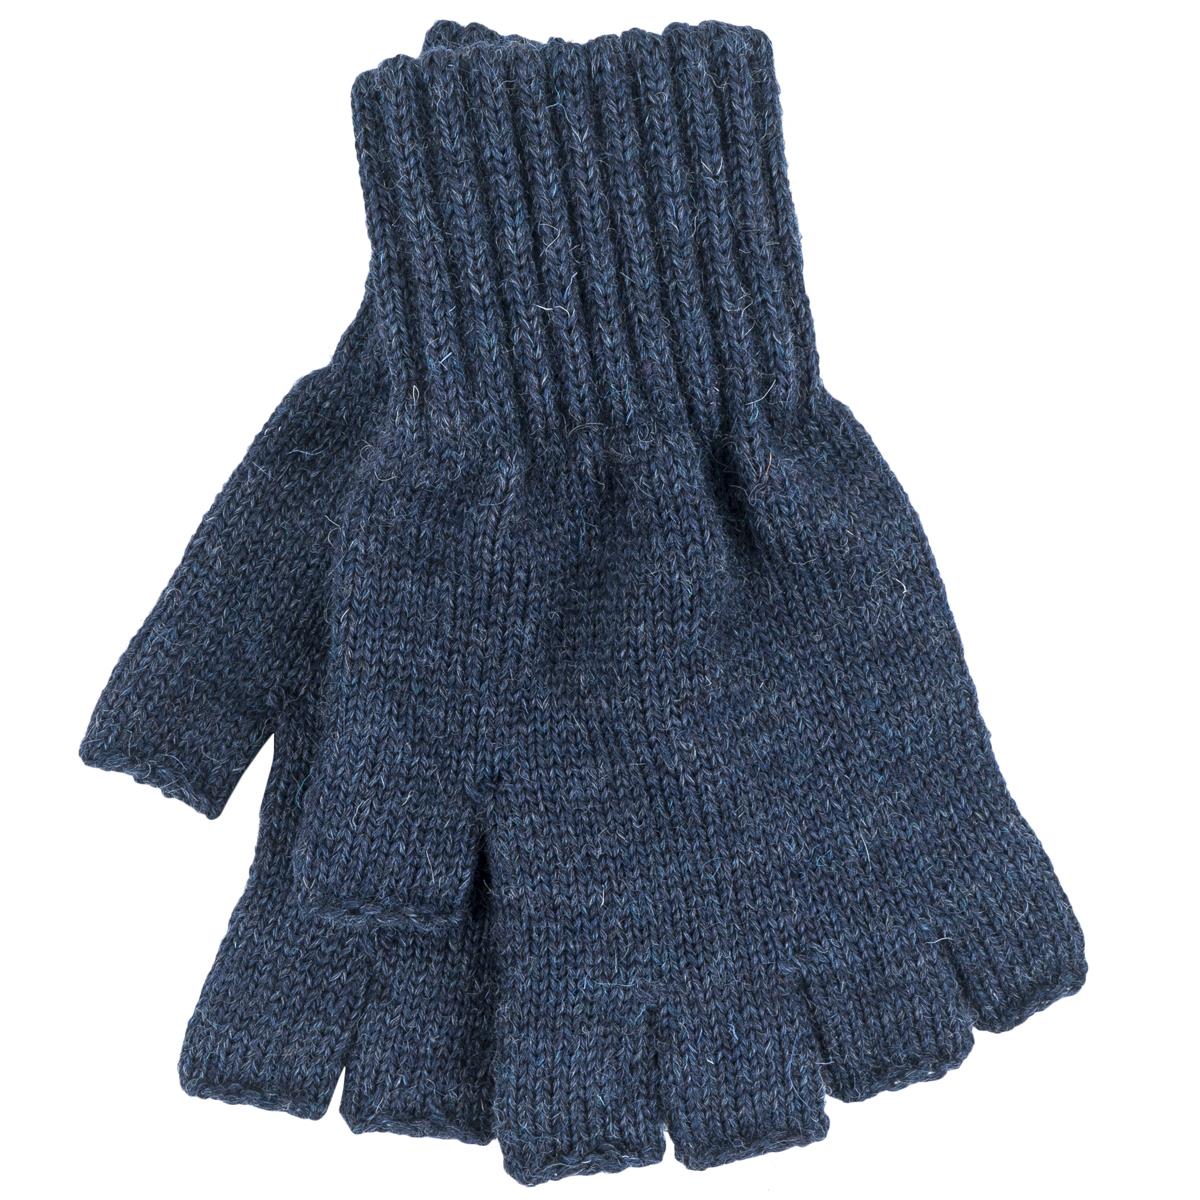 What's the ideal size for Barbour fingerless gloves?